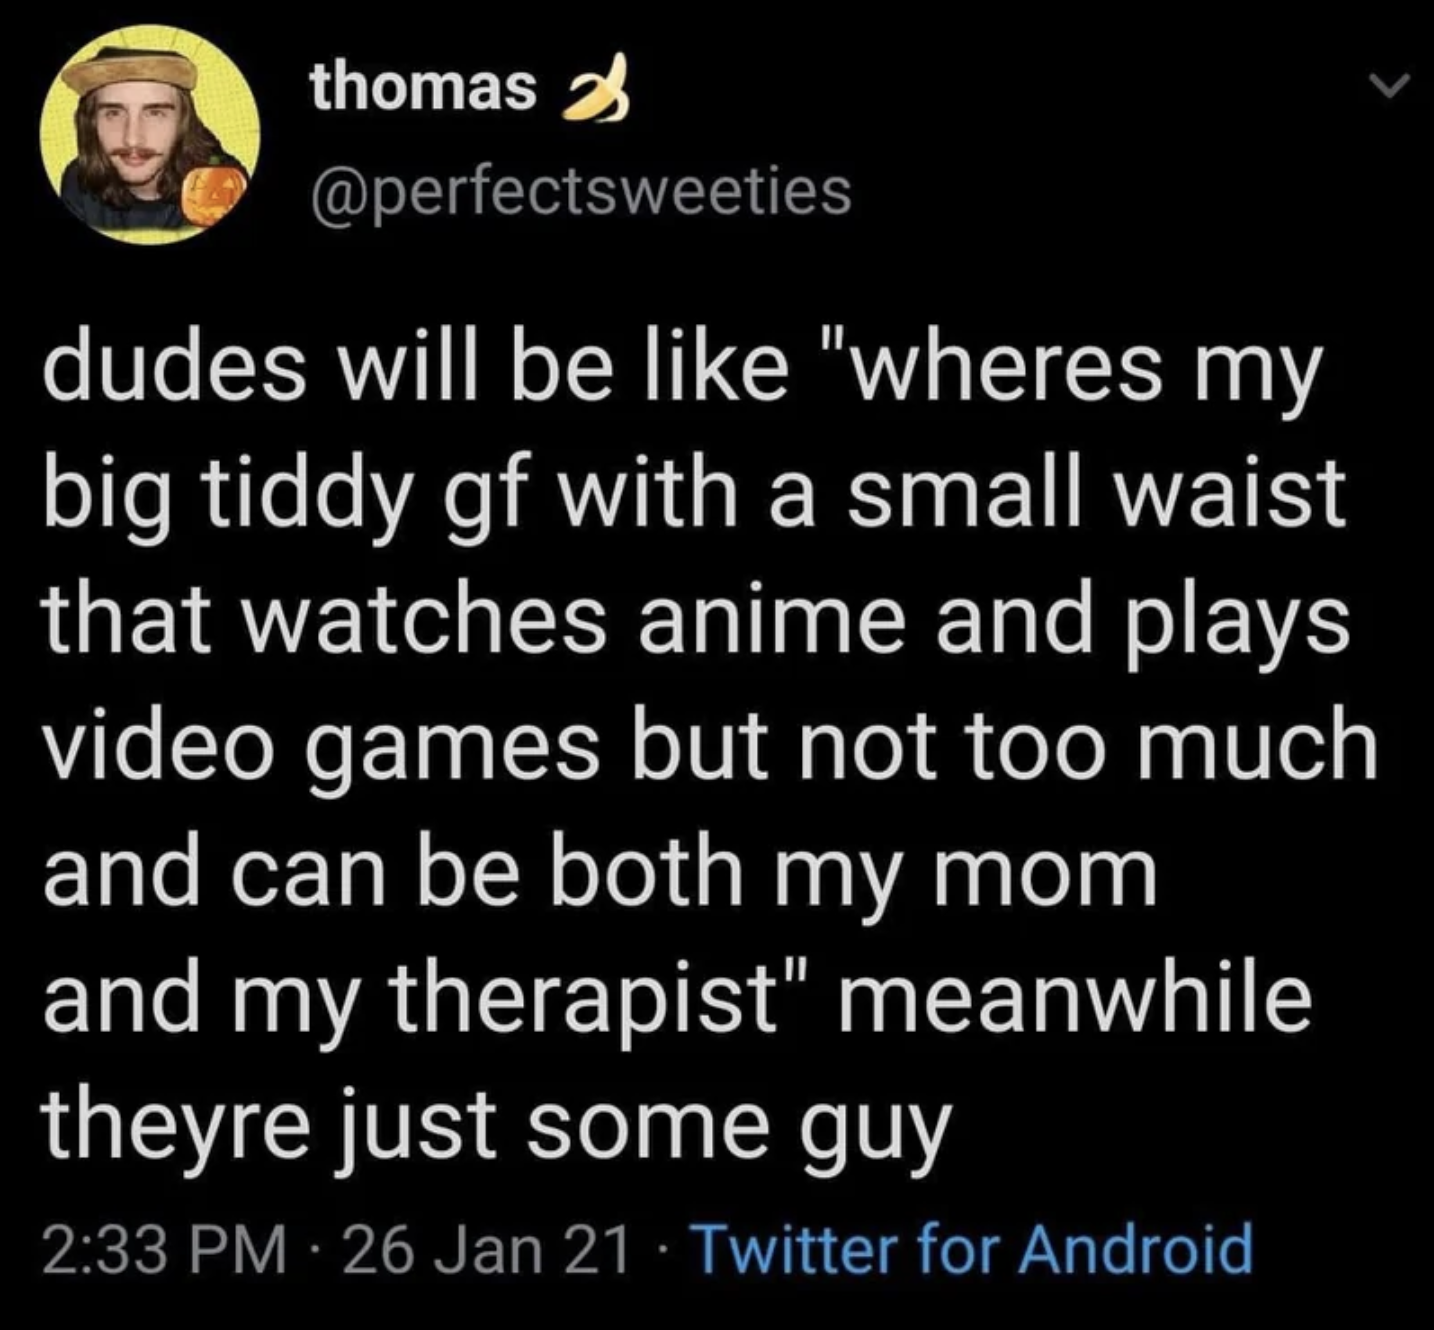 screenshot - thomas dudes will be "wheres my big tiddy gf with a small waist that watches anime and plays video games but not too much and can be both my mom and my therapist" meanwhile theyre just some guy 26 Jan 21 Twitter for Android